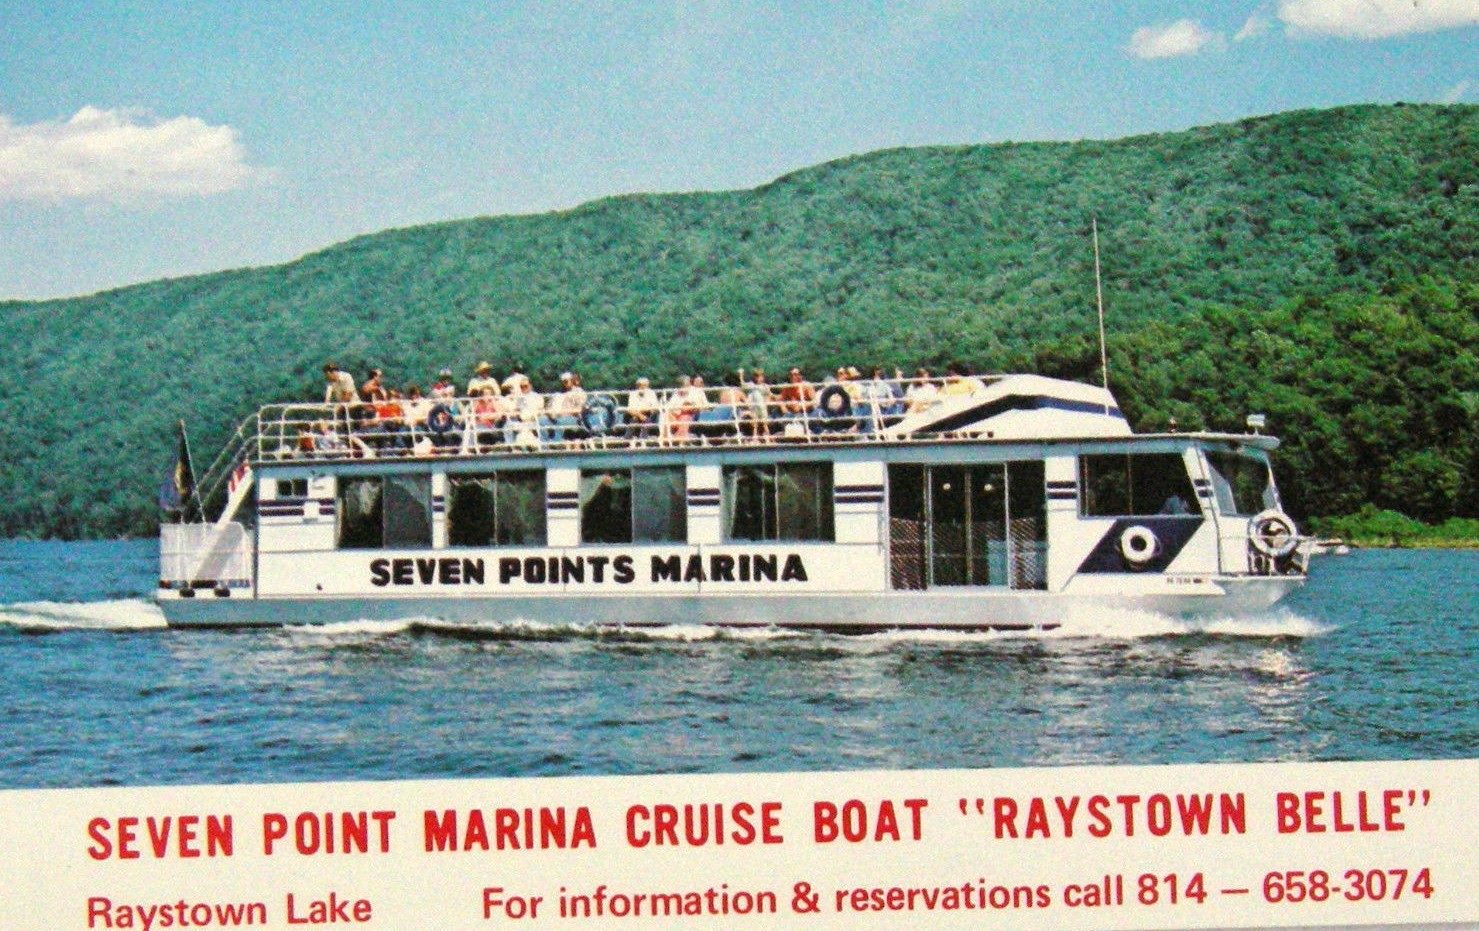 Raystown Belle